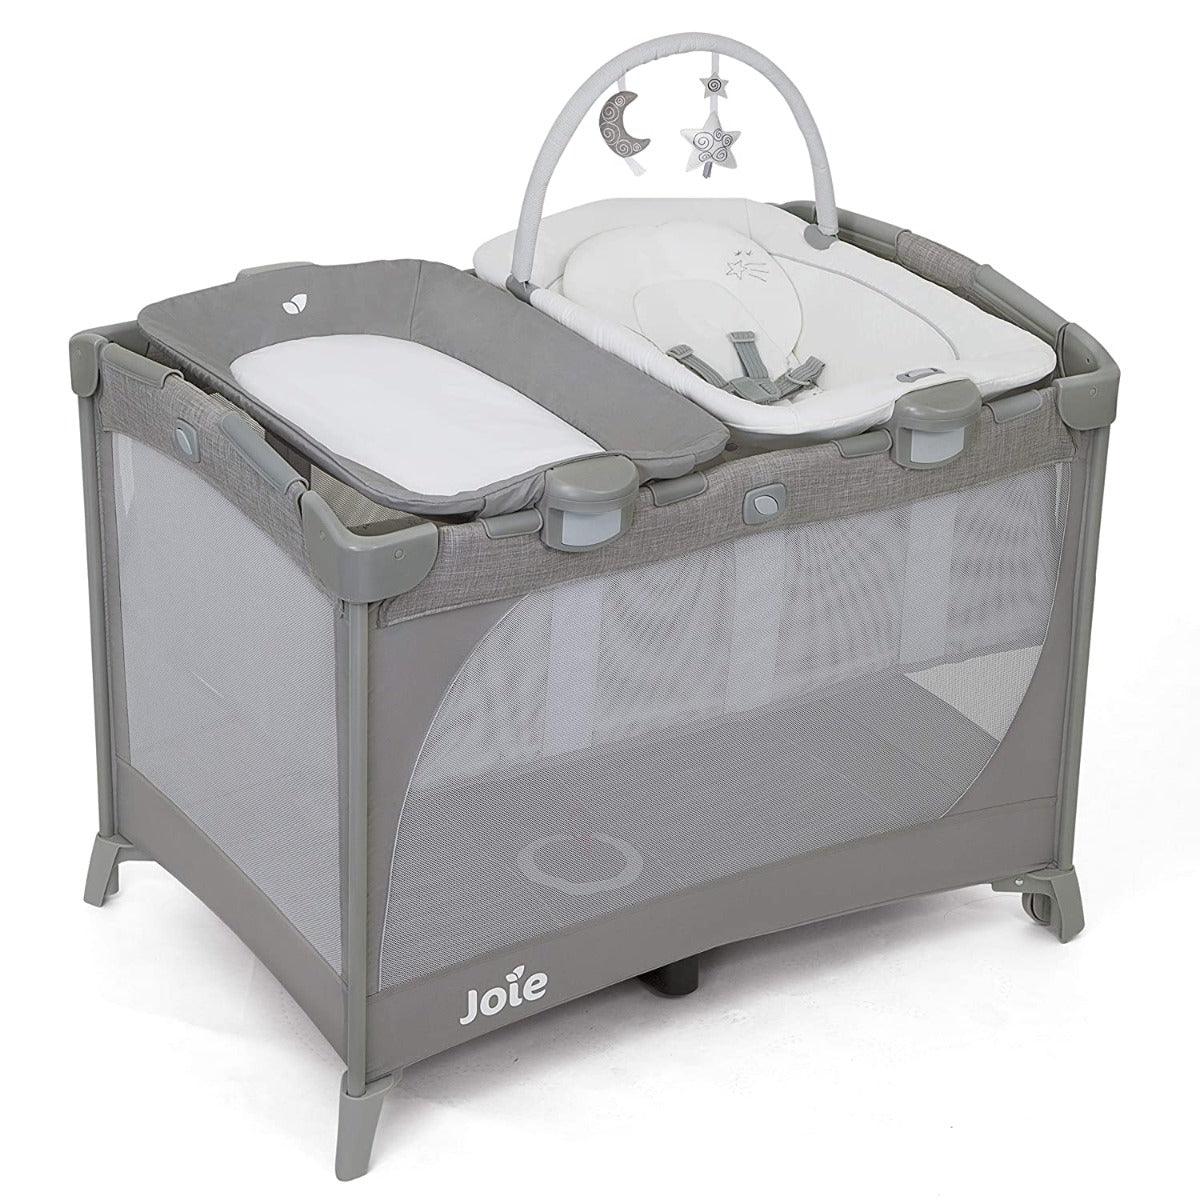 Joie Commuter Change & Bounce Baby Cot Starry Night - Playard For Ages 0-3 Years